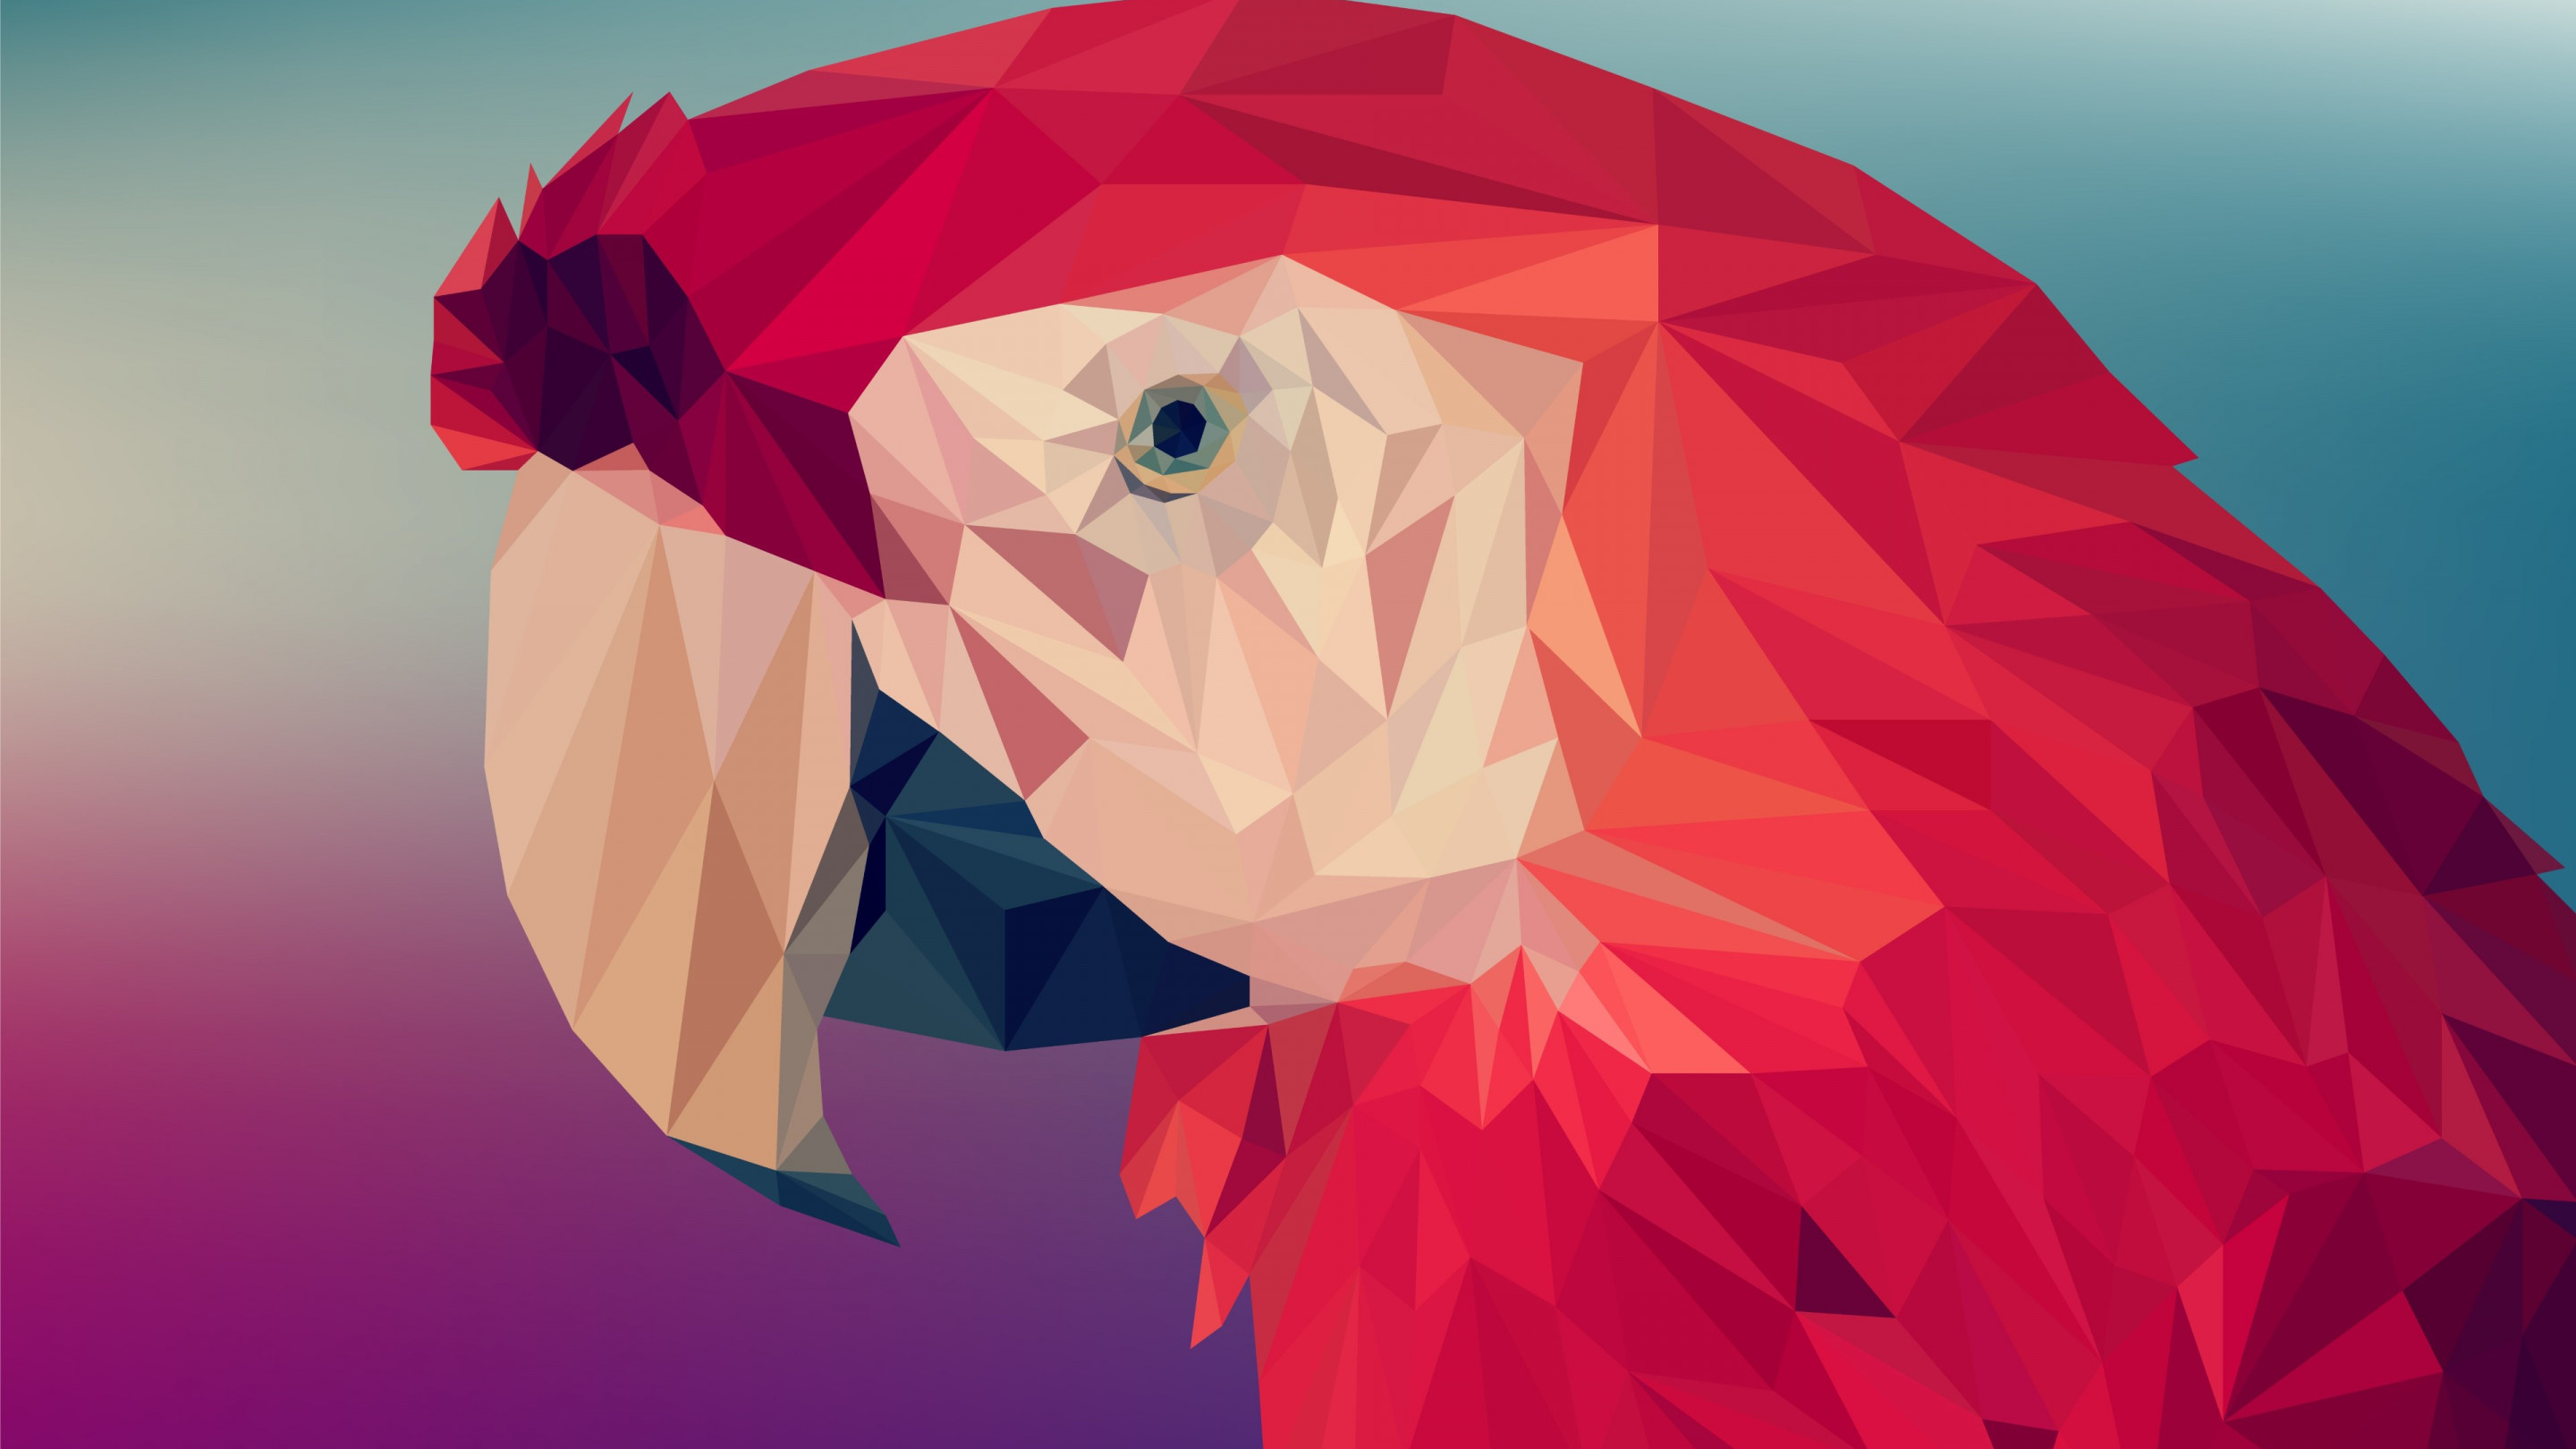 Low poly art: Red parrot wallpaper 2880x1620